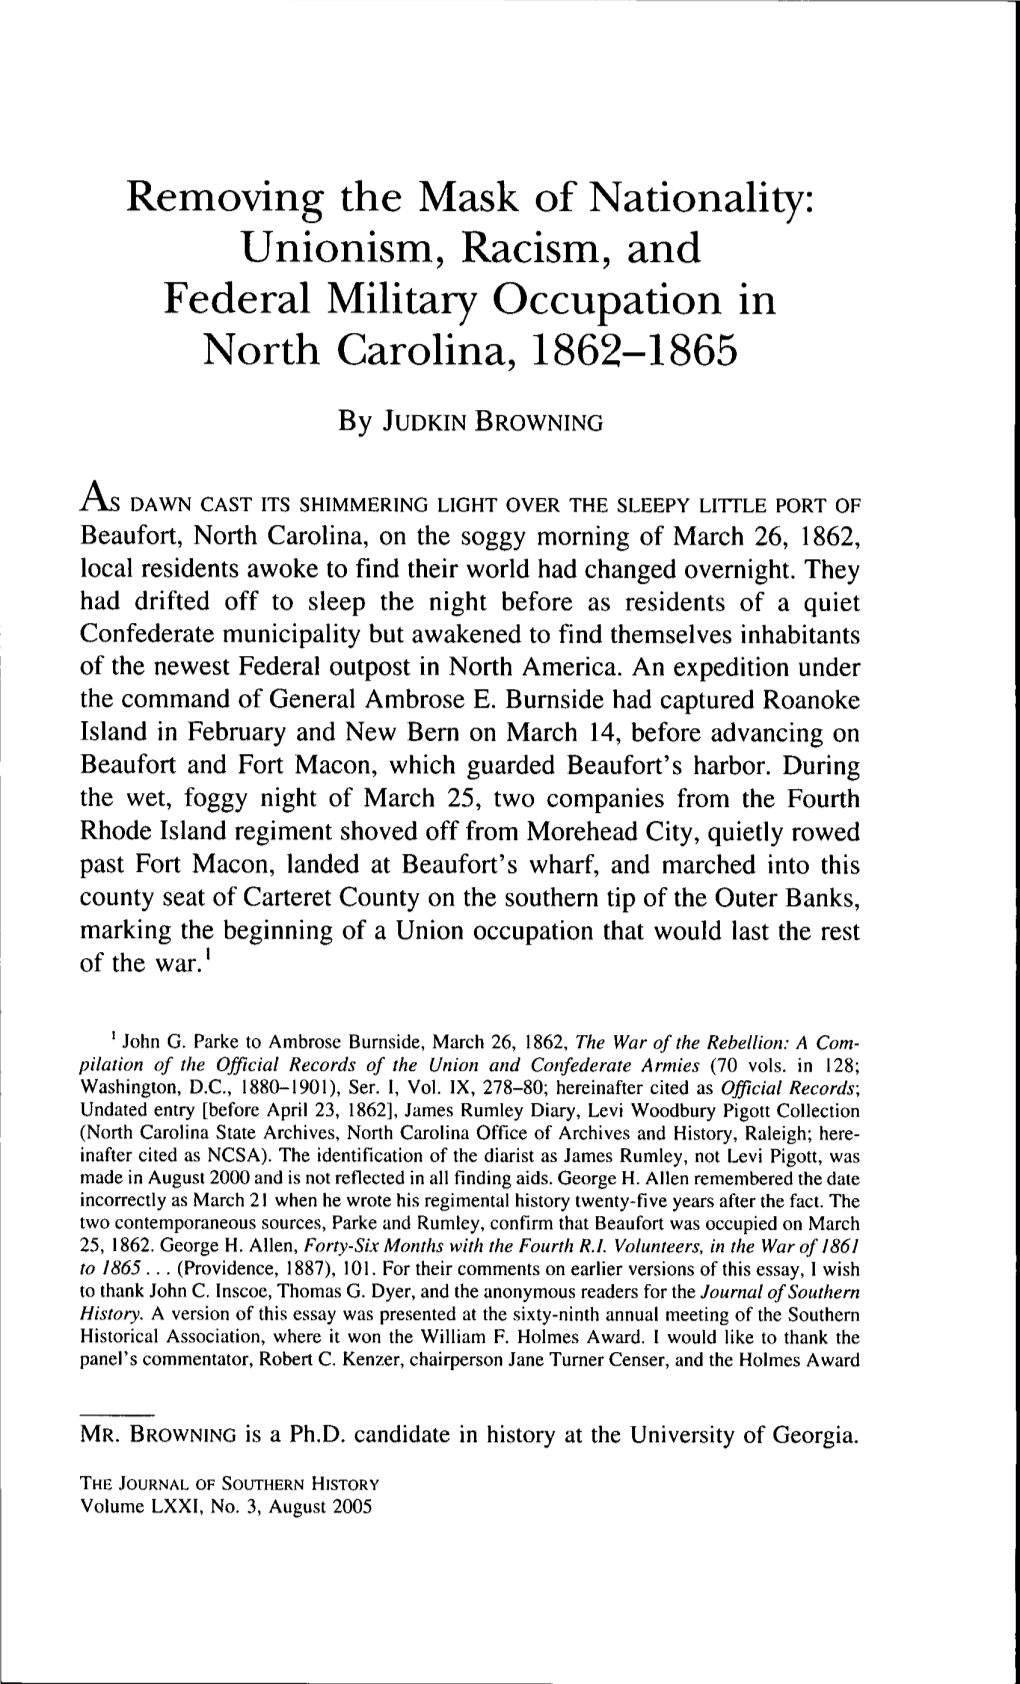 Unionism, Racism, and Federal Military Occupation in North Carolina, 1862-1865